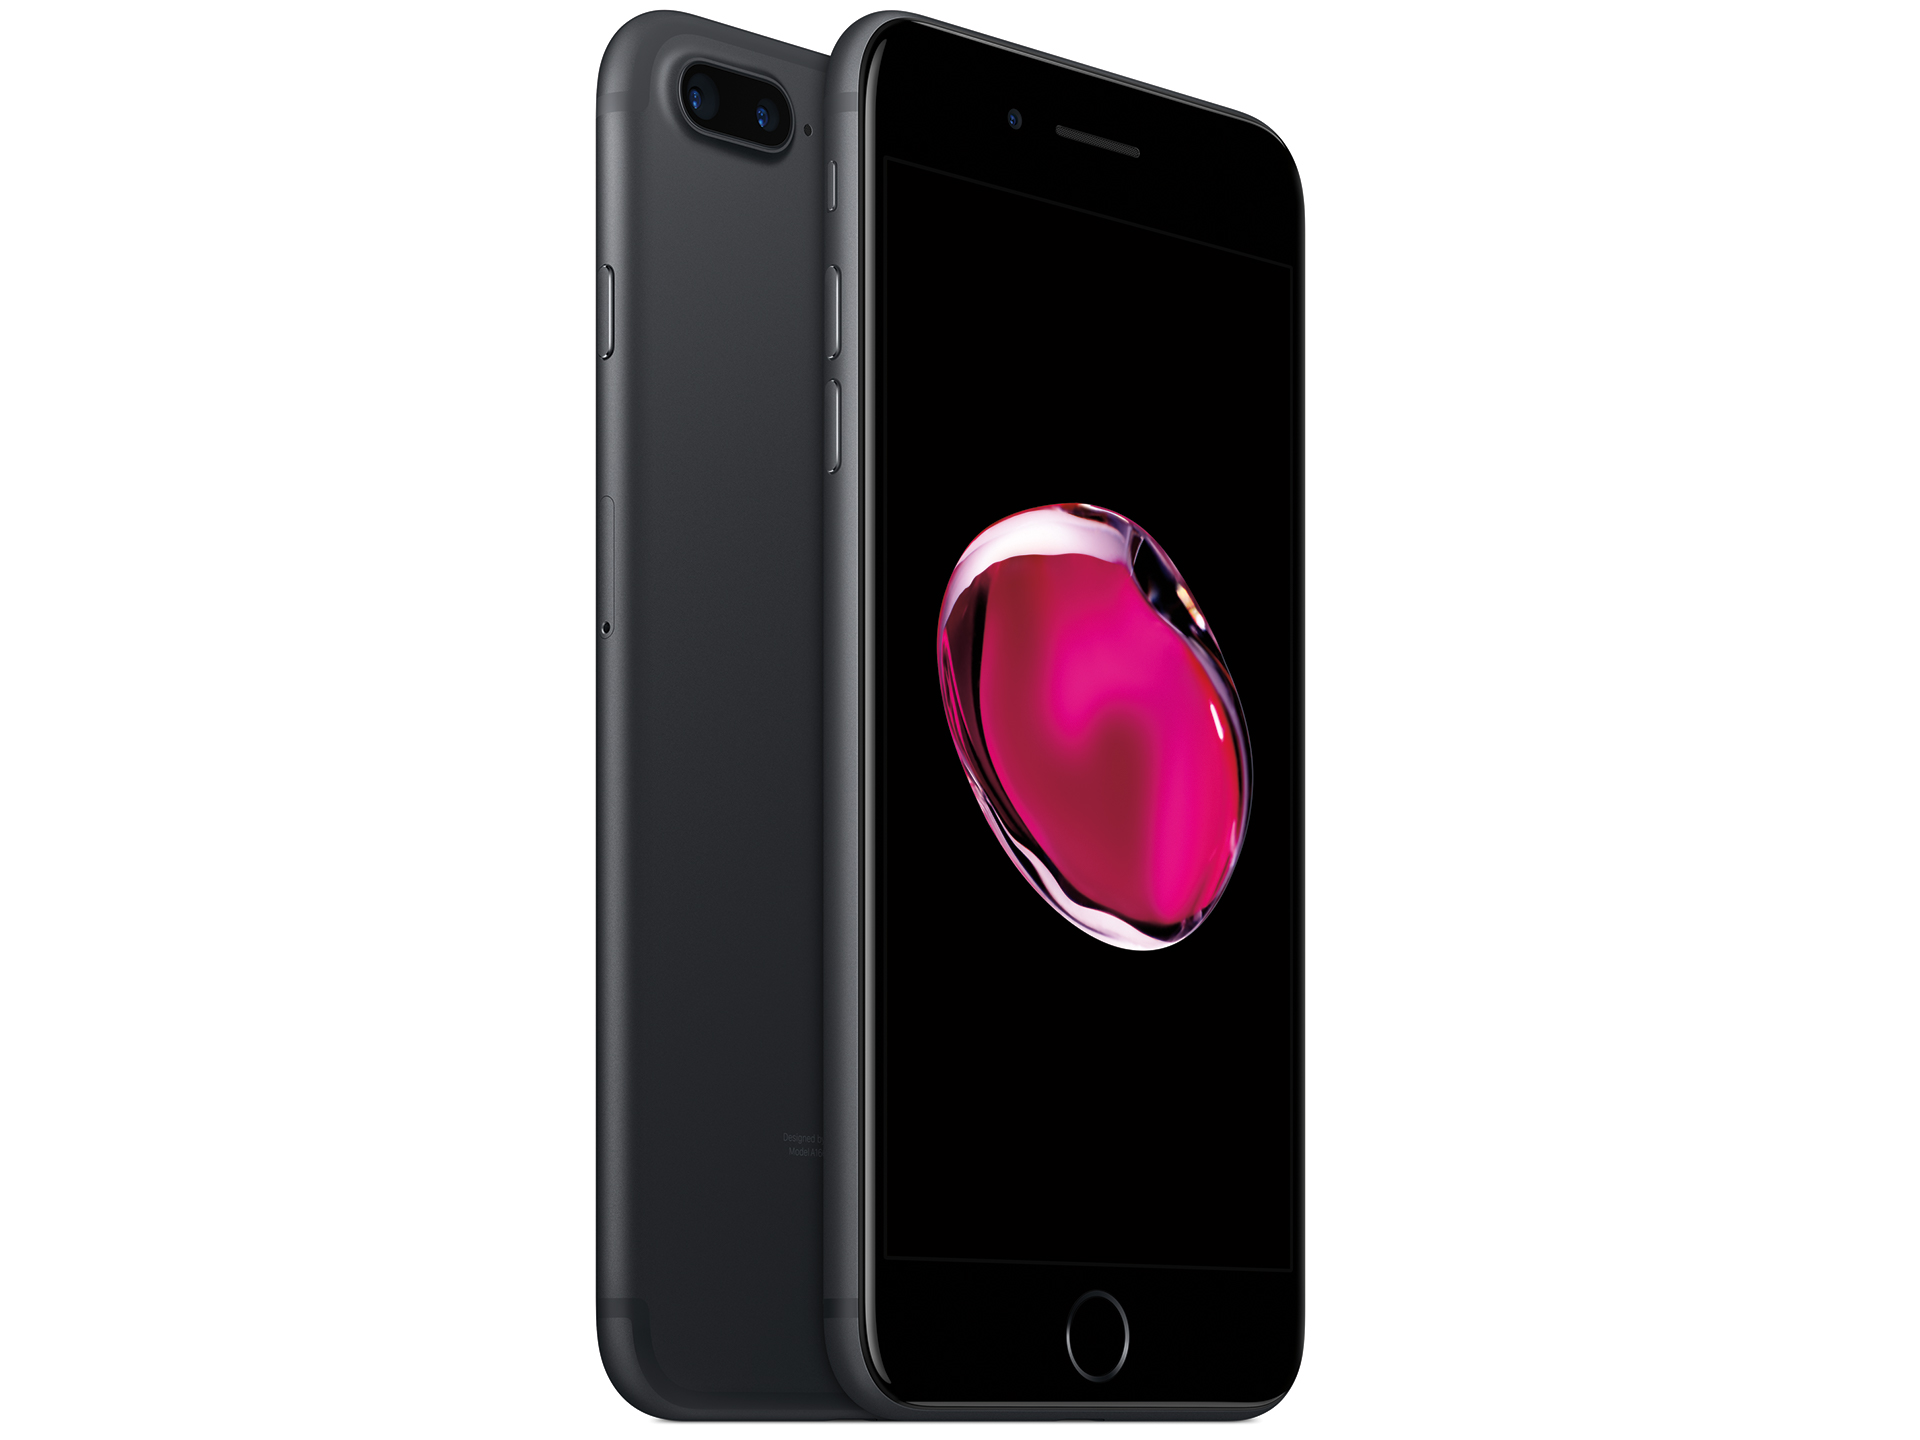 Apple Iphone 7 Plus Smartphone Review Notebookcheck Net Reviews